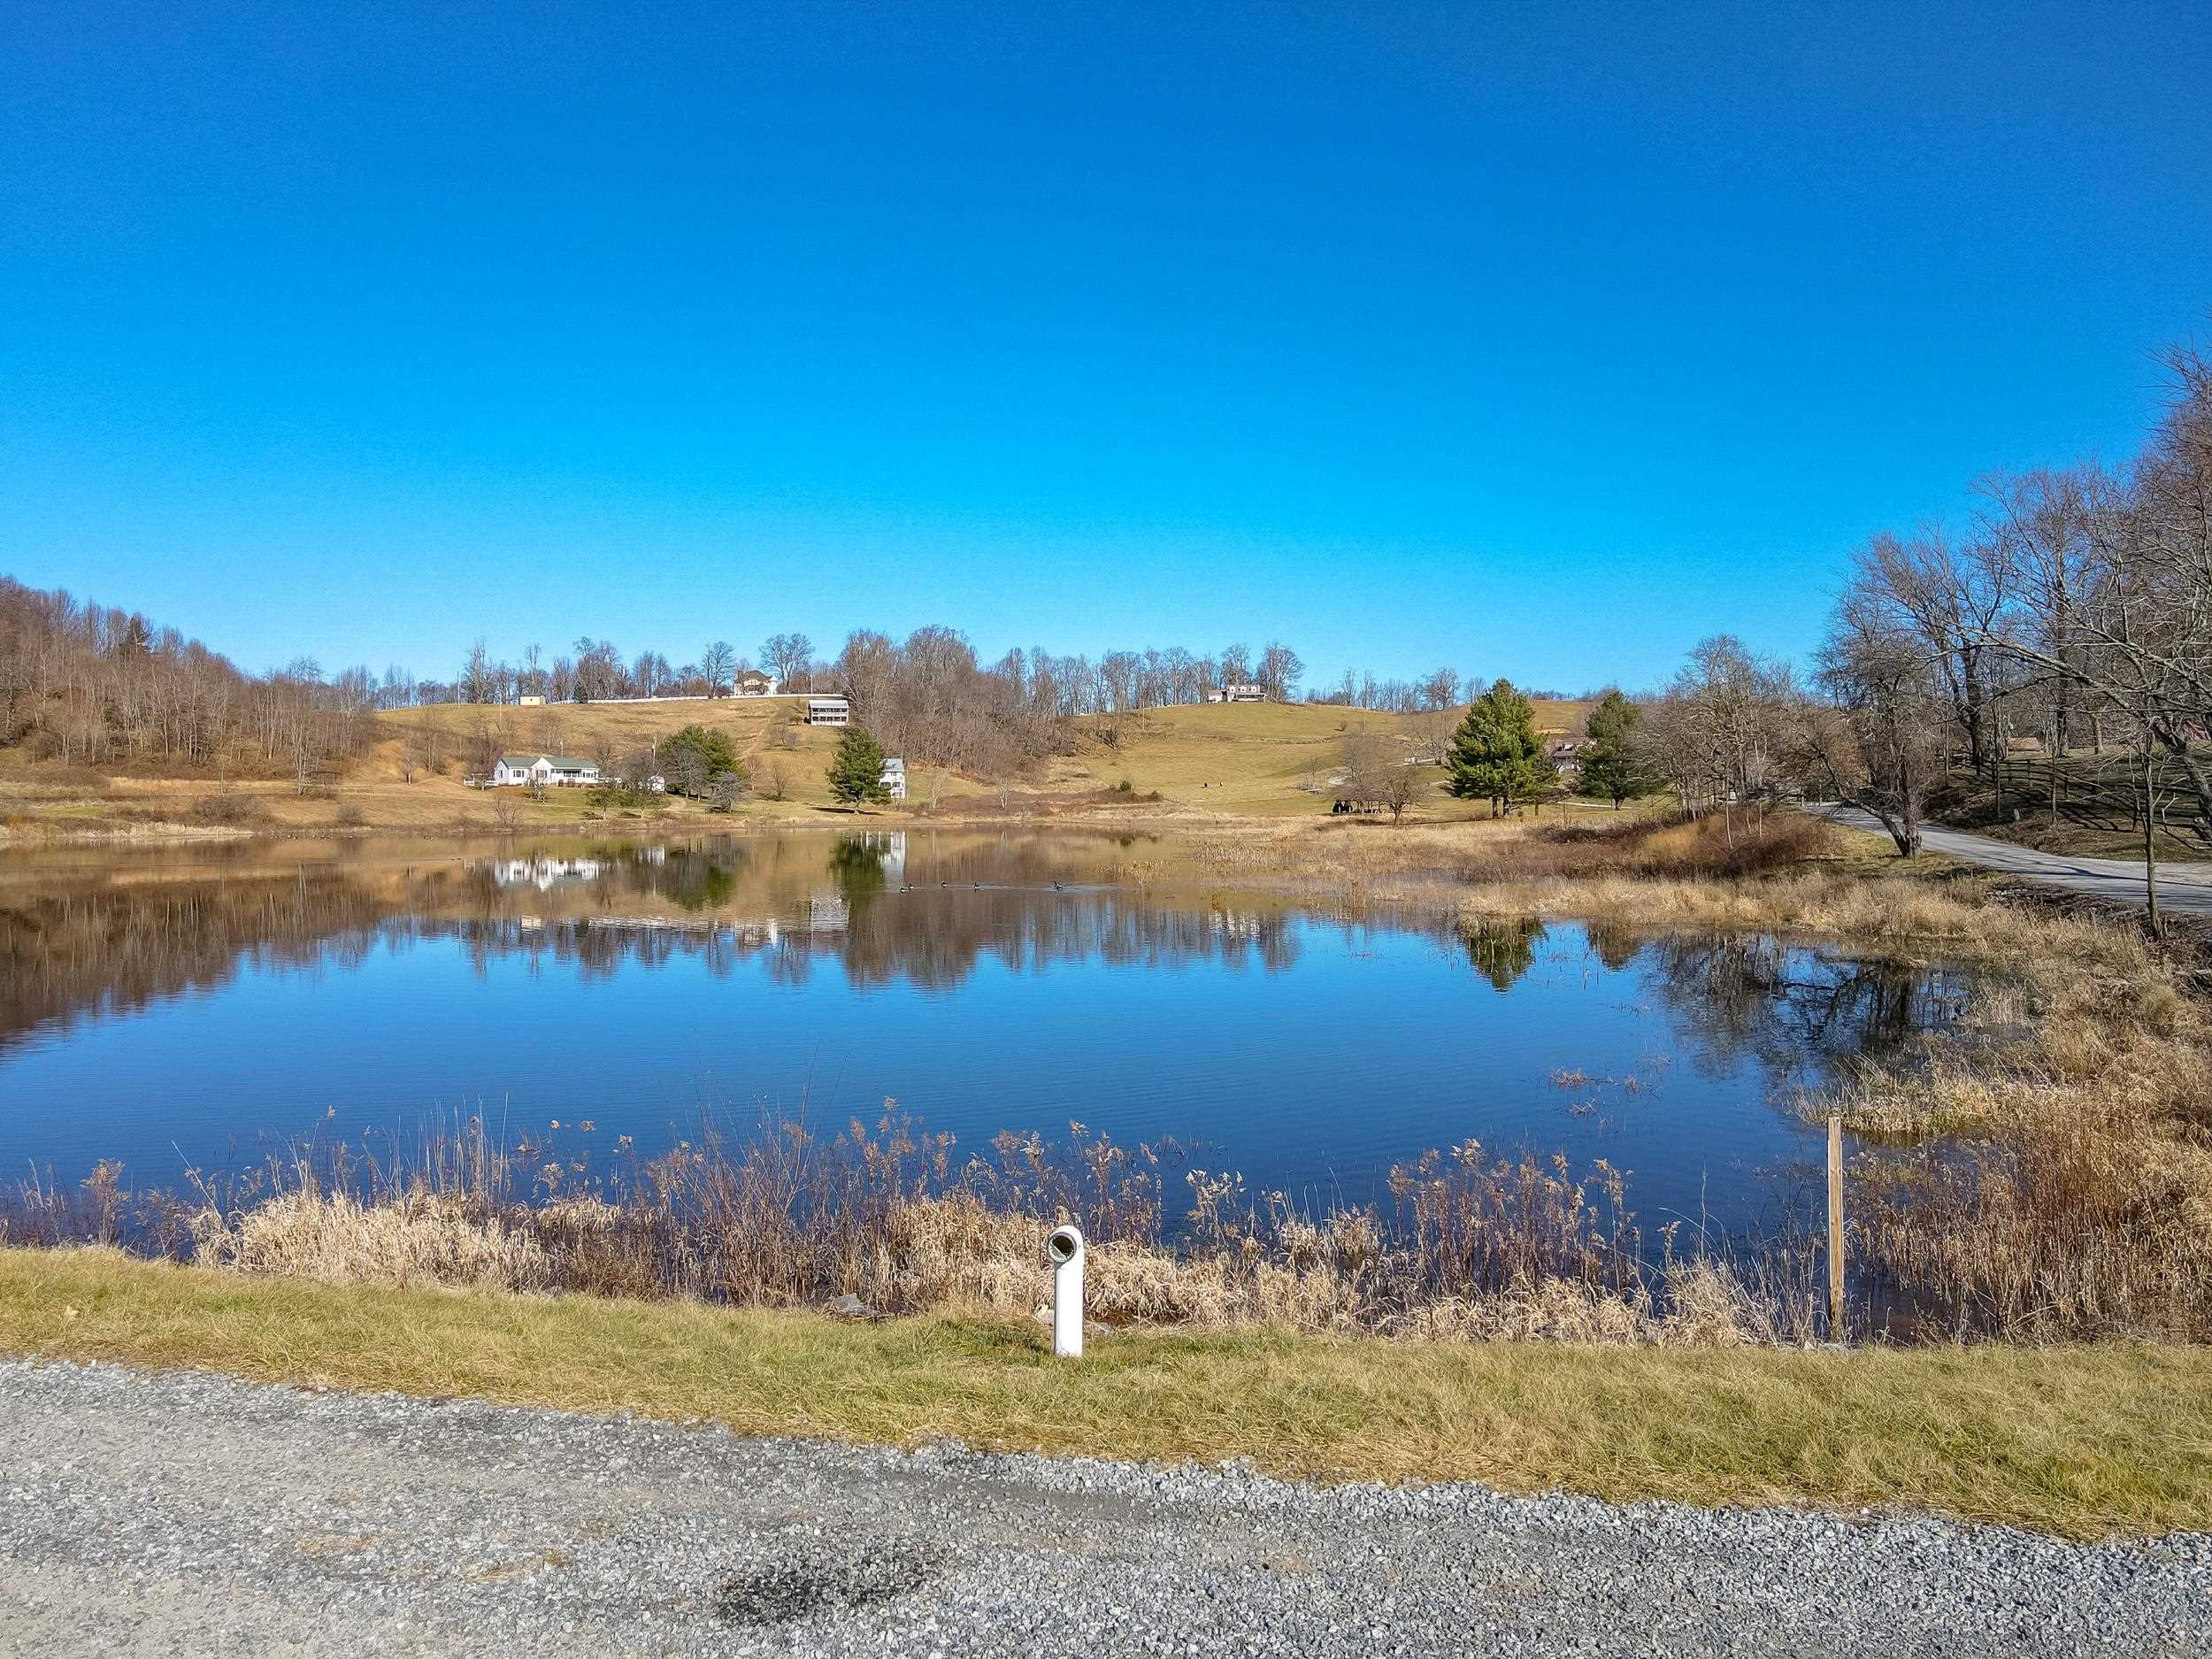 This 2.17 acres are gently sloped, and would not be difficult to put a driveway in and build your dream home. The main attraction here is the deeded access you have to the private lake, which is over 9 acres in size. The lake also has a picnic shelter available for lot owners. The location is just 5 miles to the grocery store in Independence, and conveniently located to hiking trails, trout fishing, and state and national parks. There are equestrian trails around also. You have the perfect location for the avid outdoors person. This lot already has a road bed for a driveway. You are just 30 minutes to Galax, and 40 minutes to Wytheville. Both locations offer a variety of shopping, a hospital, and more. You are also just an hour and a half to Winston Salem, NC. This is a nice opportunity to get in cheap before the area's growth increases the values of property! Road and common area maintenance fees are just $200 per year per lot. Very gentle covenants and restrictions.